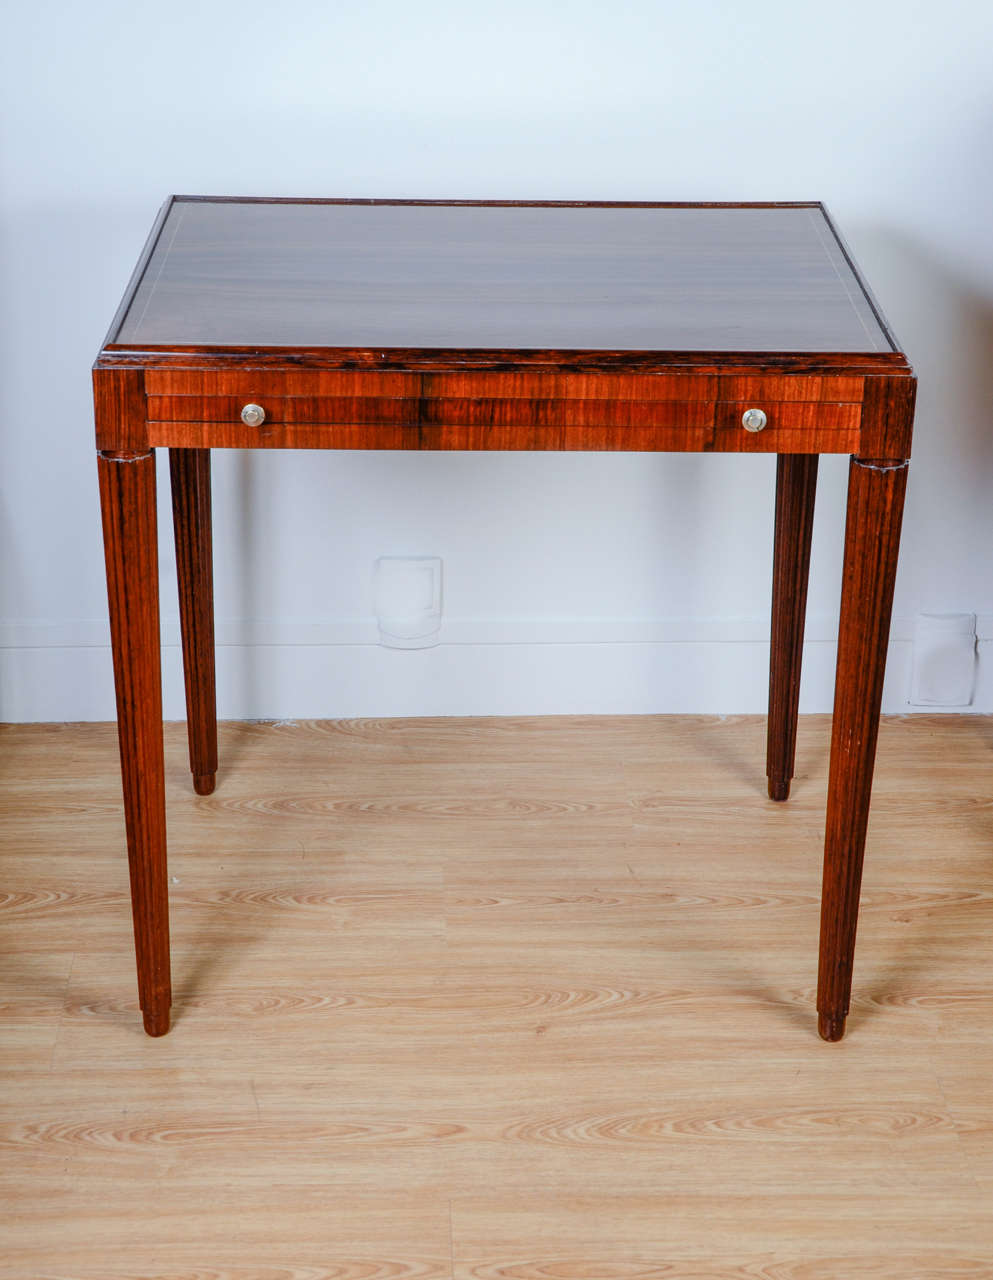 Elegant writing table in rosewood veneer, the tray is decorated with a light wood filet, two buttons allow to slide the tray. The table rests on four fluted legs,

France, 1940s.

René Joubert (1878-1931.)
Philippe Petit (1885-1945.)
D.I.M.